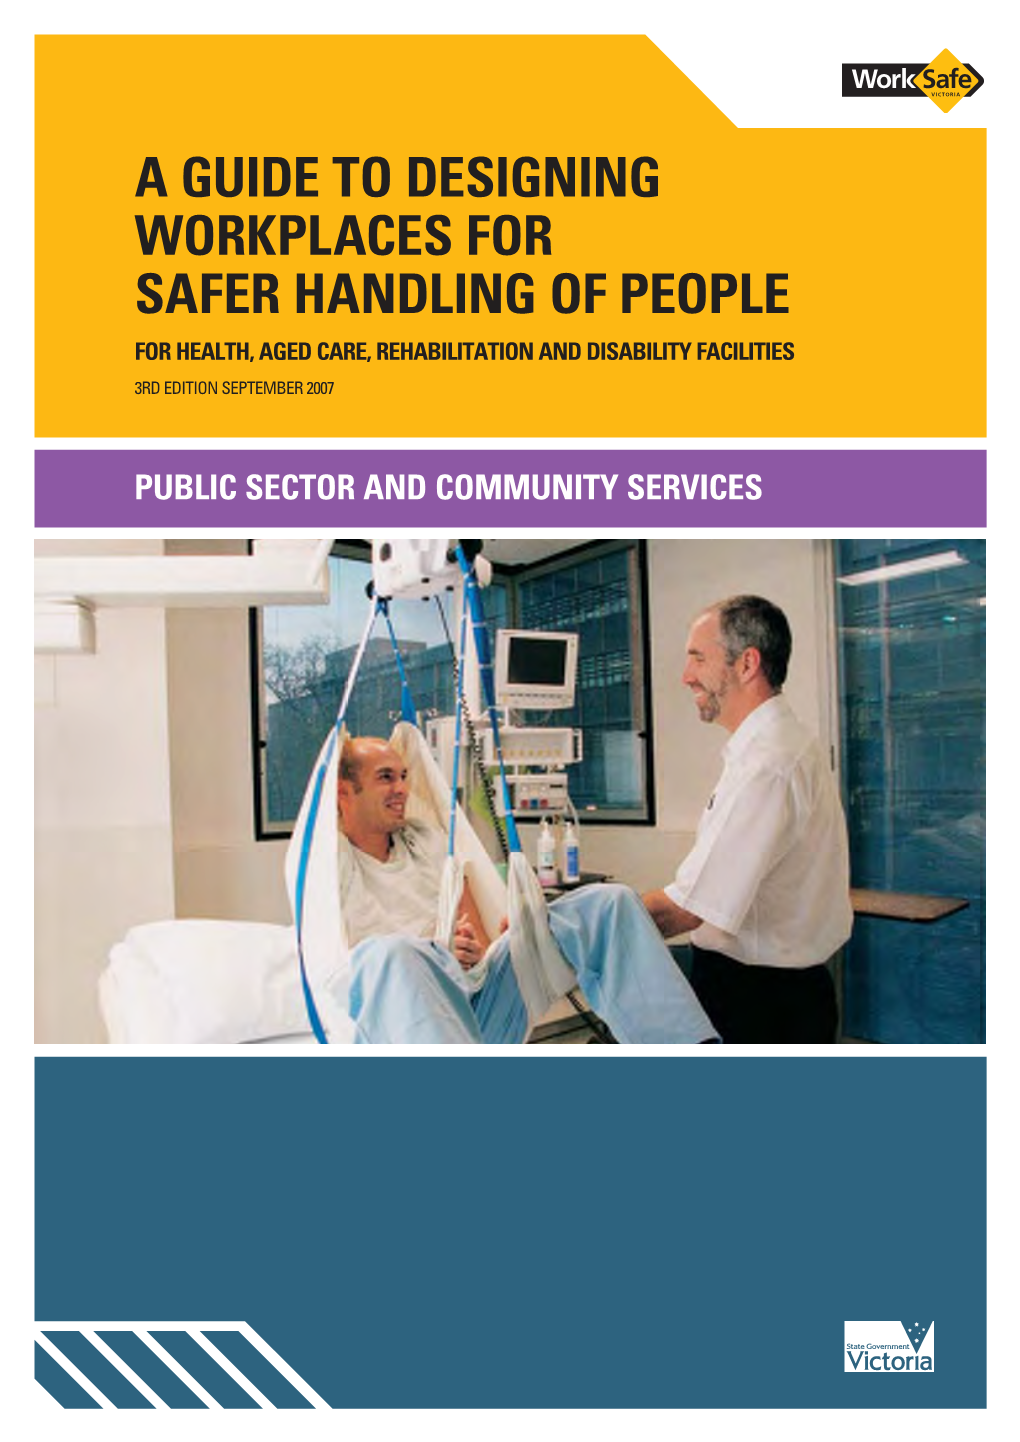 A Guide to Designing Workplaces for Safer Handling of People for Health, Aged Care, Rehabilitation and Disability Facilities 3Rd Edition September 2007 W O R K S A